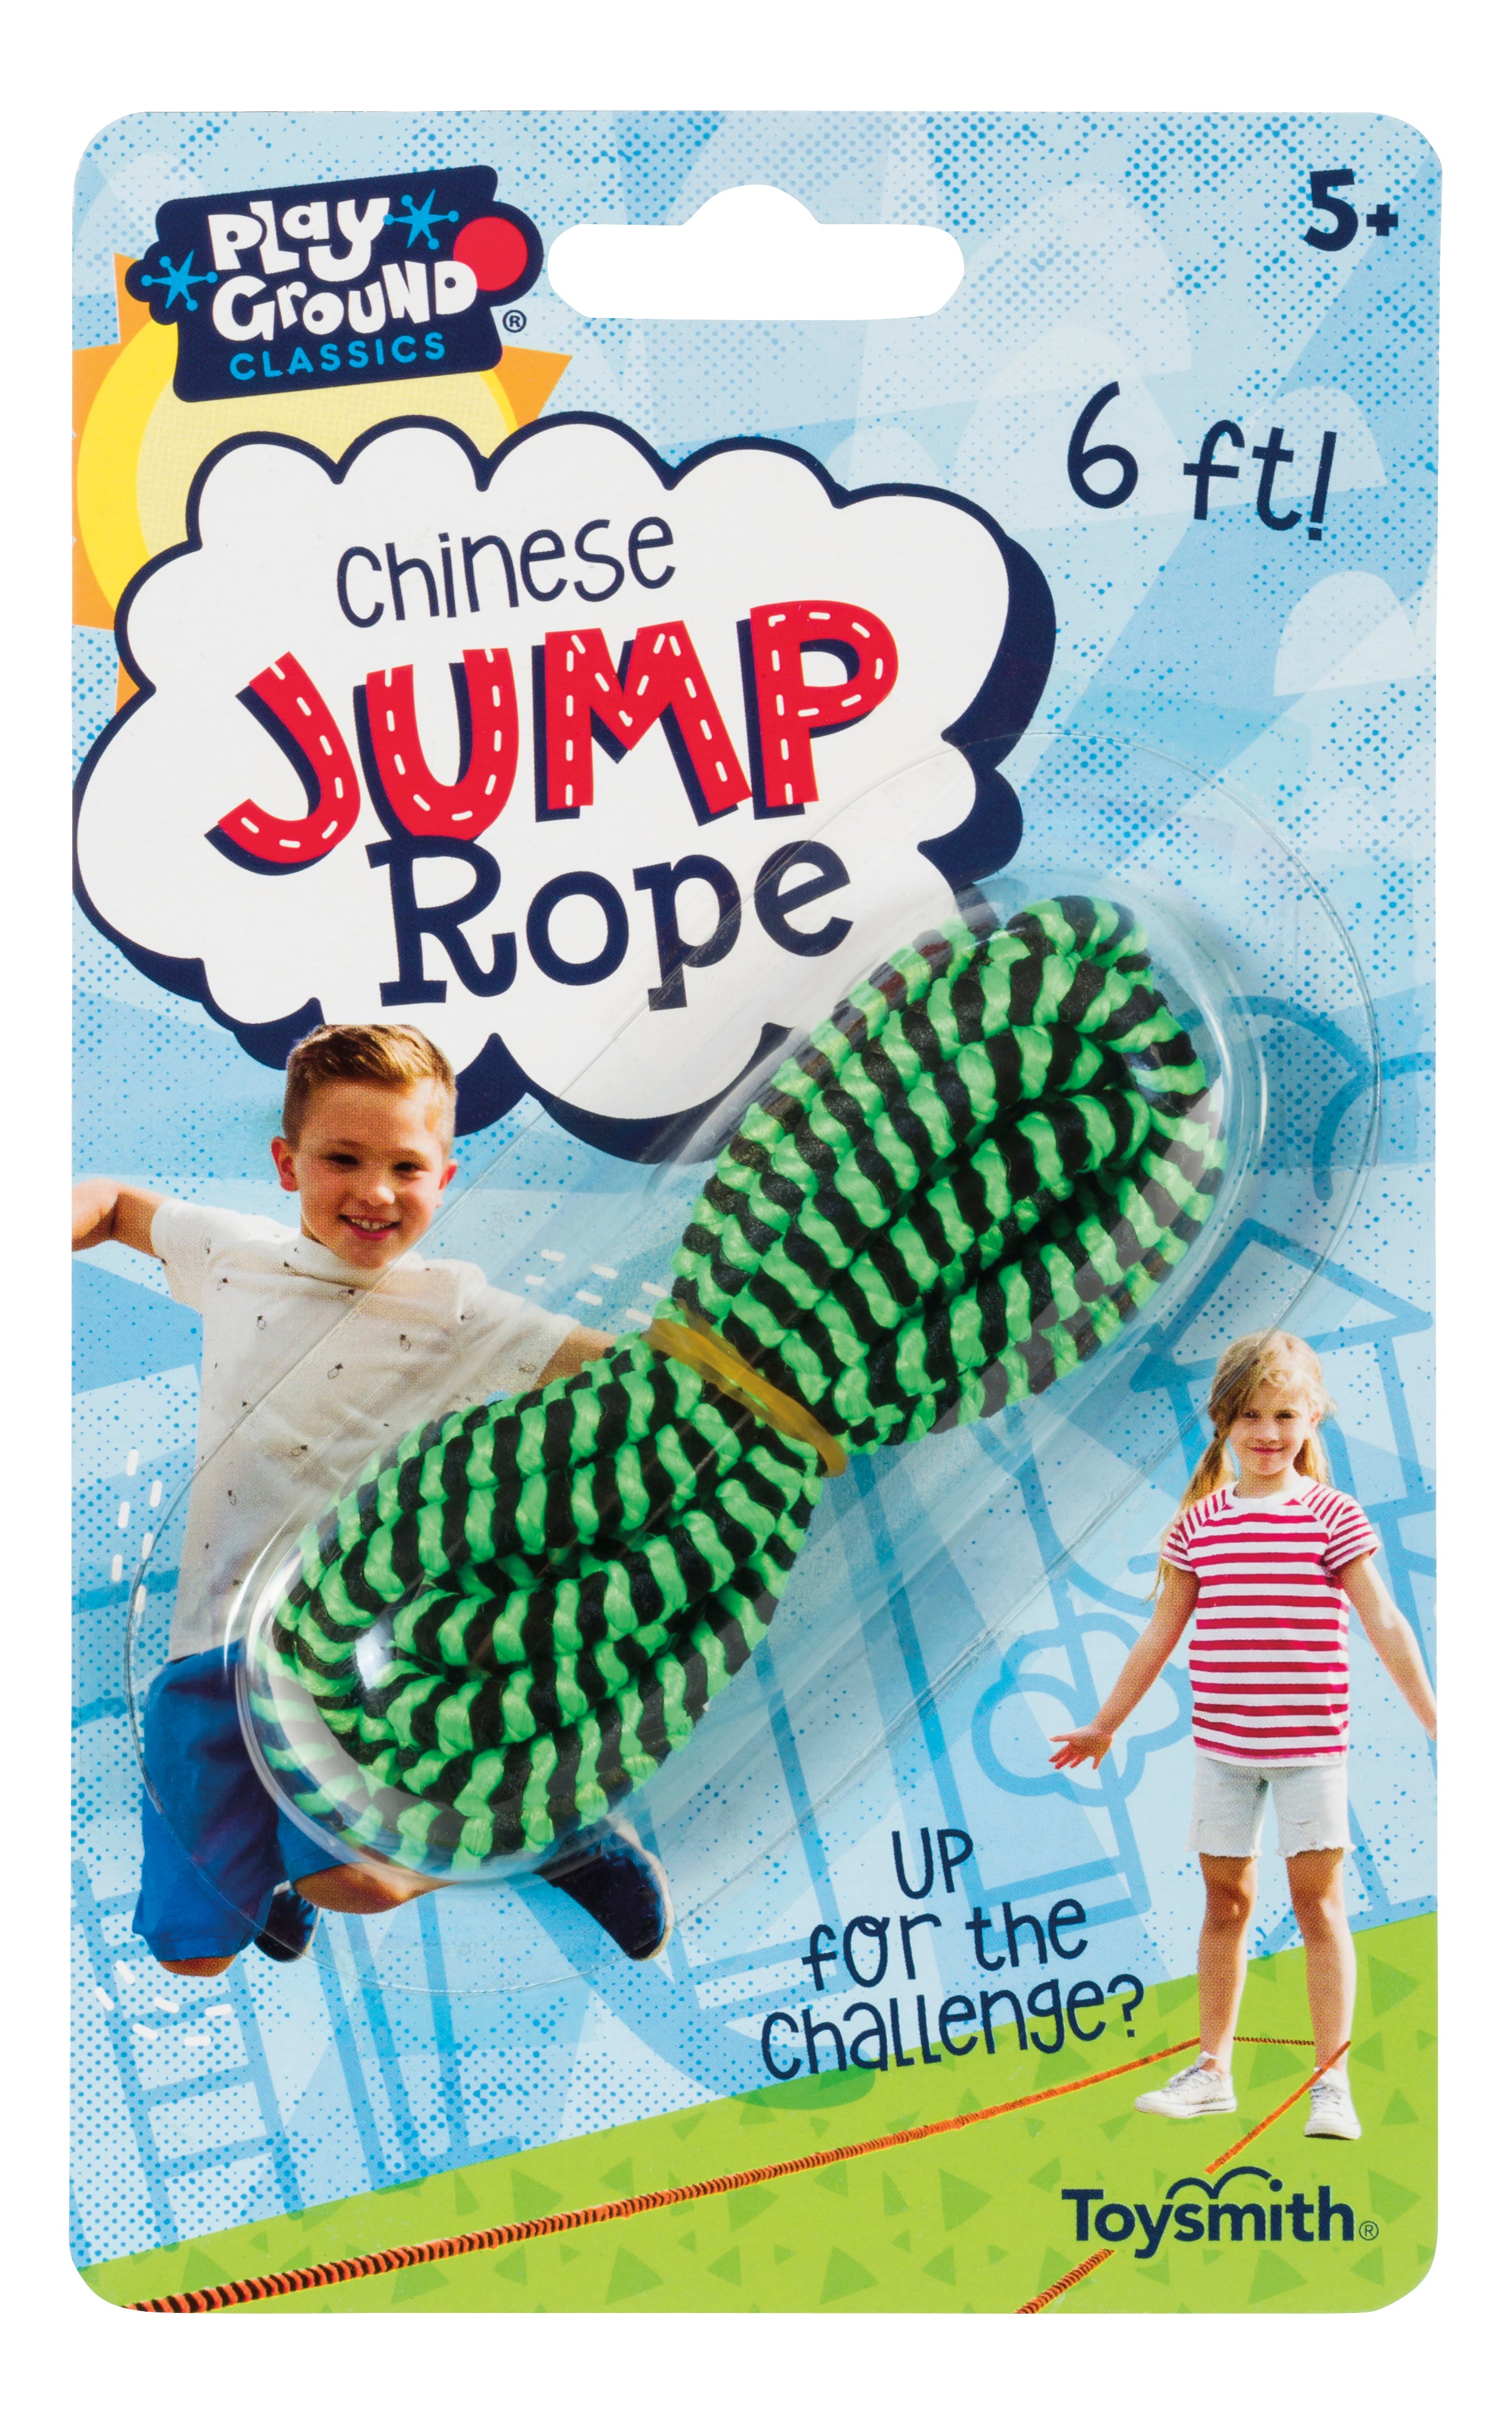 Toysmith Jumpsies (Chinese Jump Rope) Assorted Colors